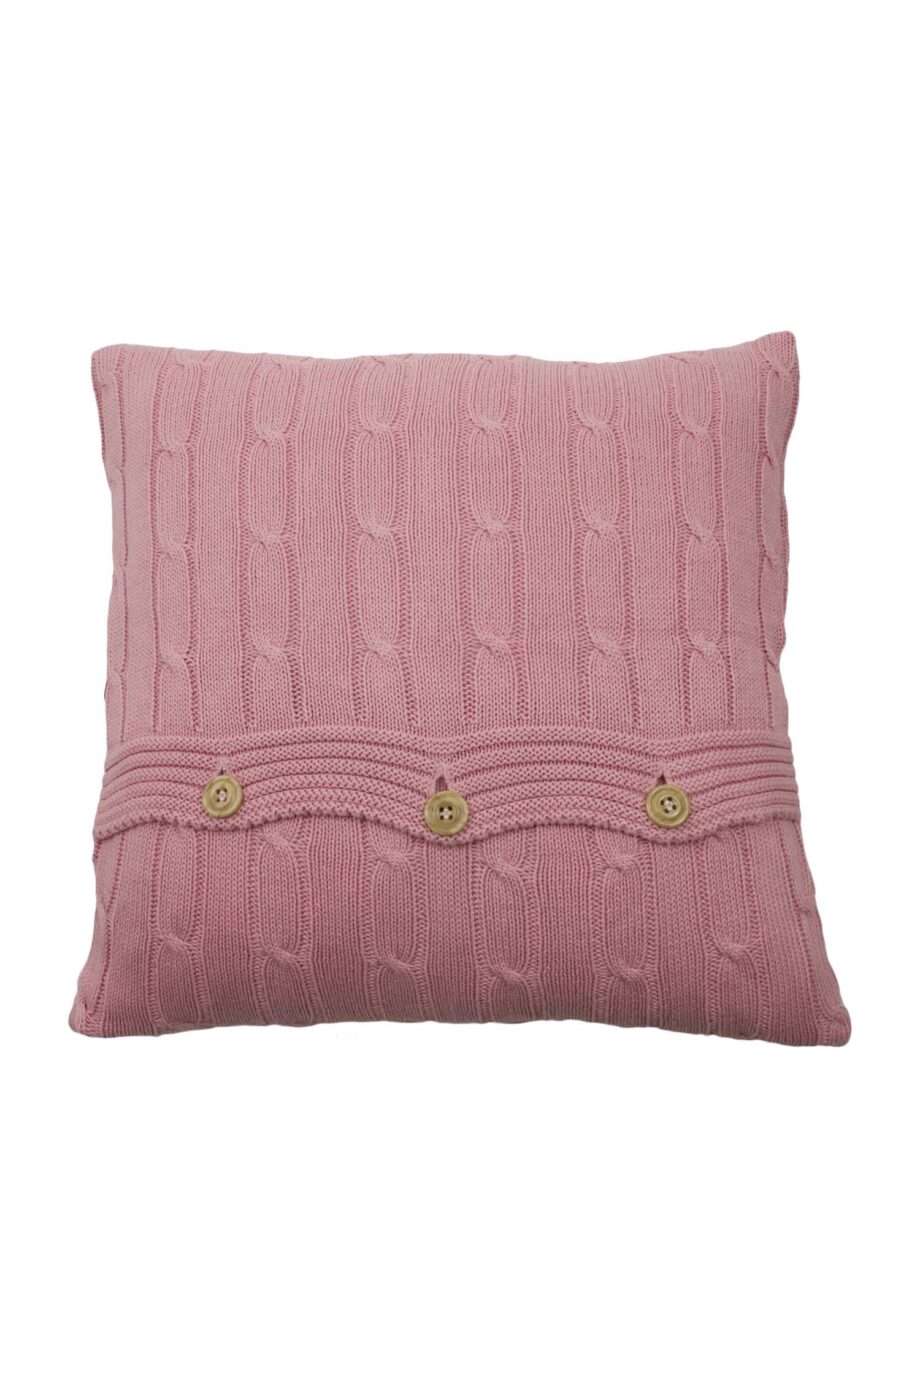 twist old rose knitted cotton pillowcase xsmall